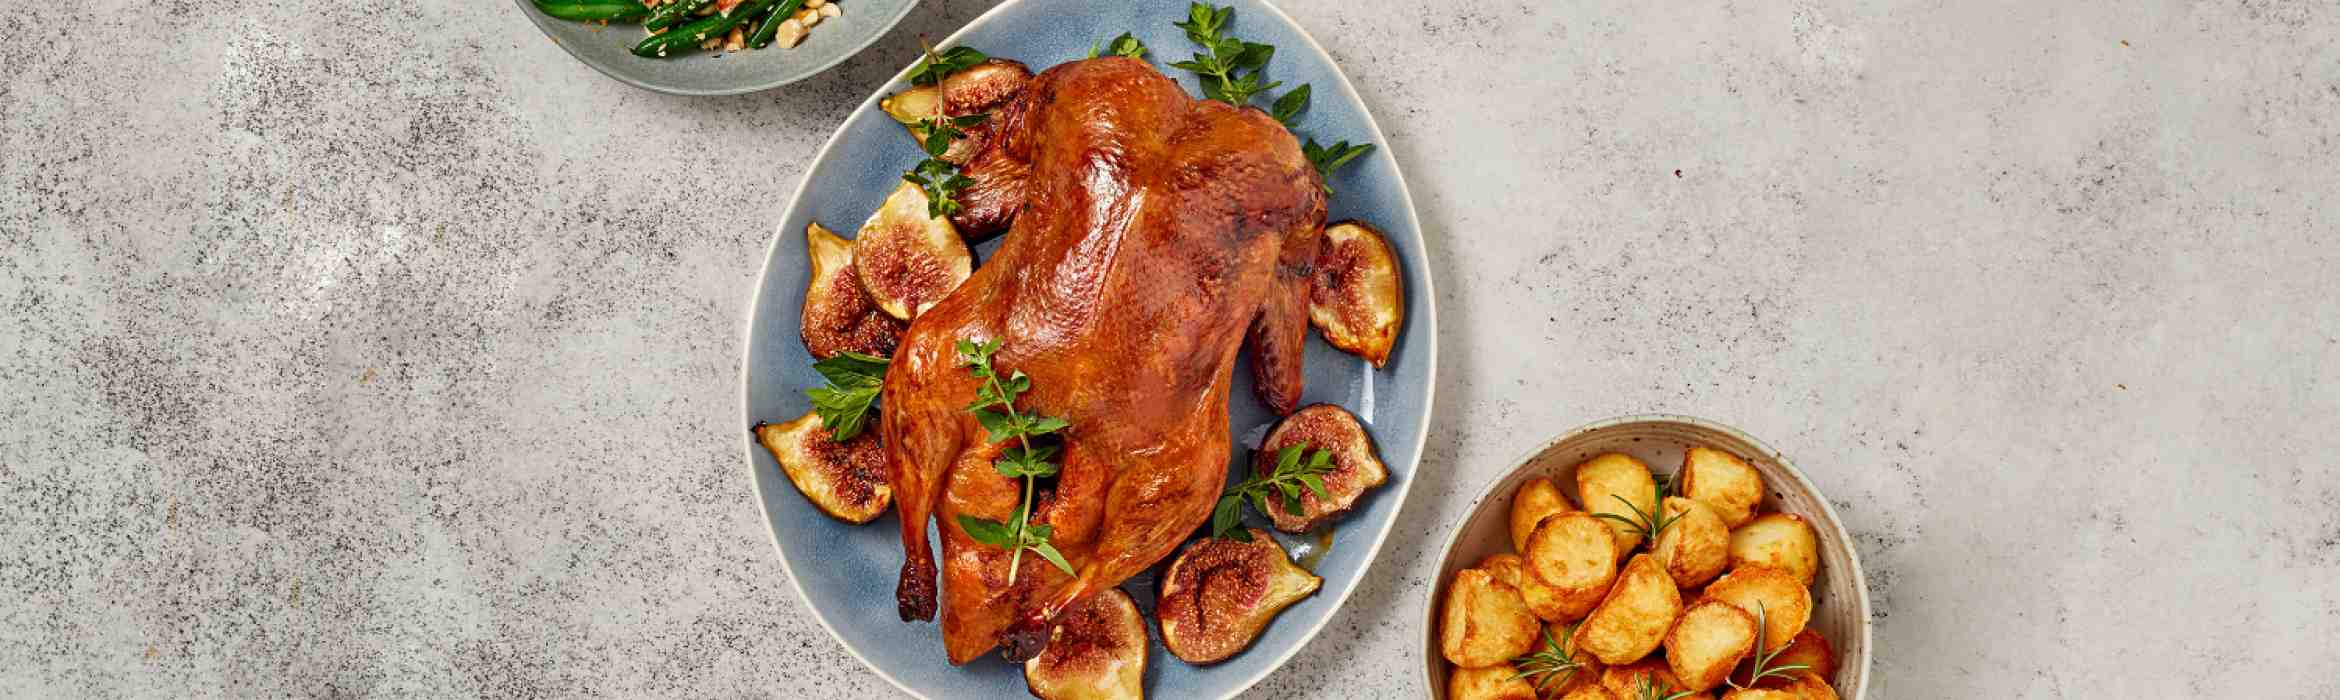 Whole Roast Duck with Honey Roasted Figs Recipe